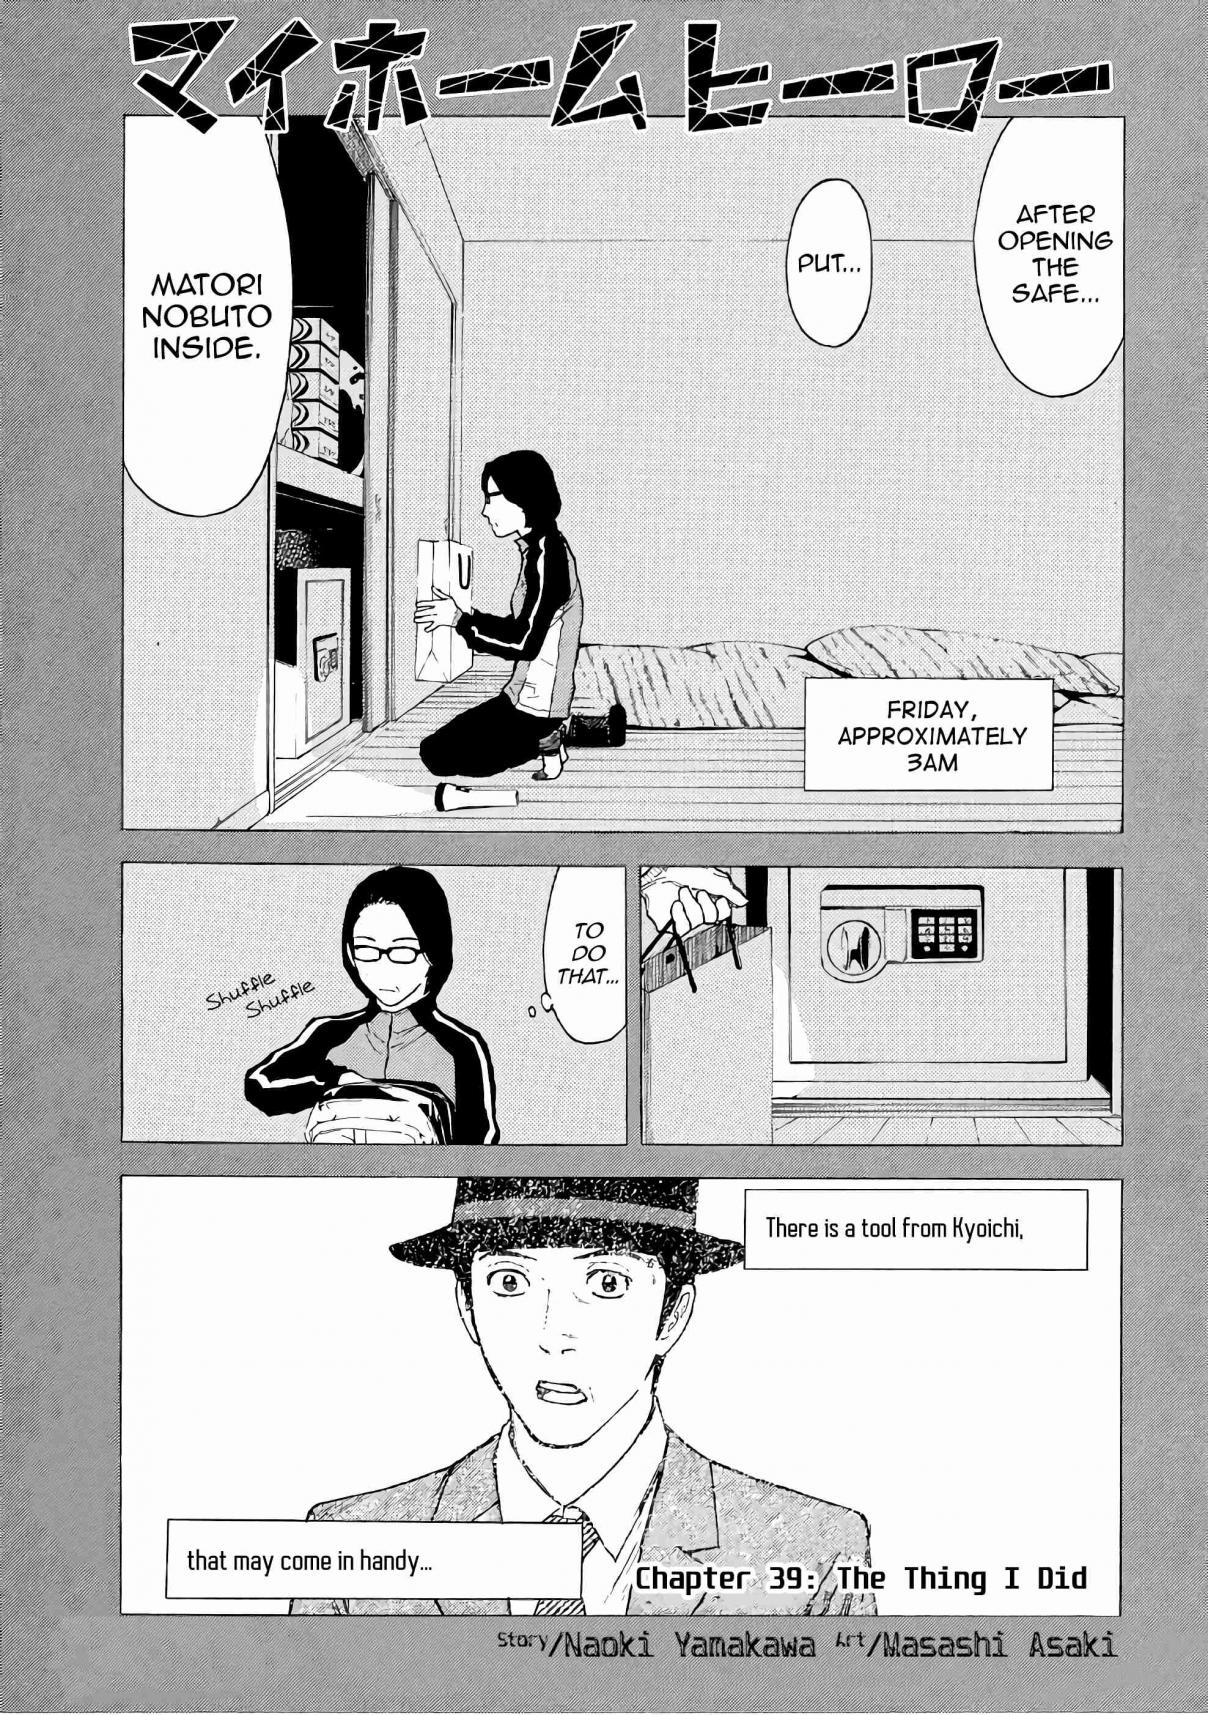 My Home Hero Vol. 5 Ch. 39 The Thing I Did